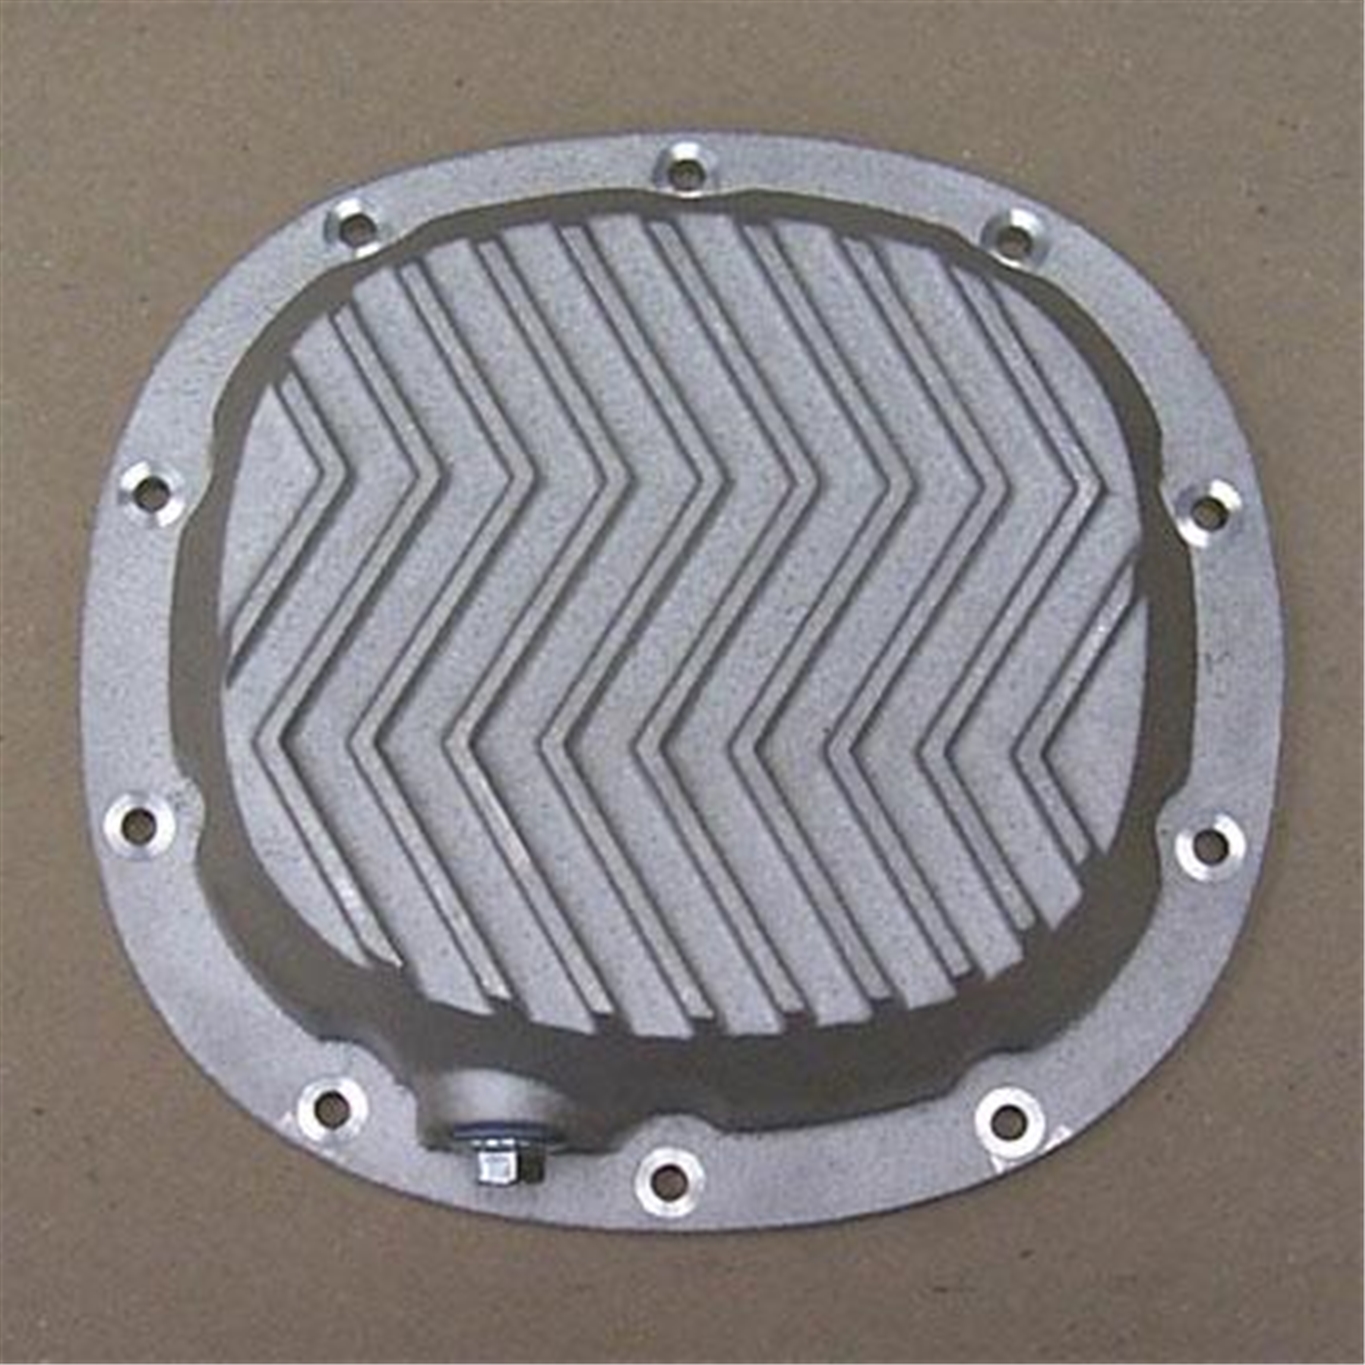 GM 7-1/2" & 7 5/8" Ring Gear, 10 Bolt Patterned Fin Cover